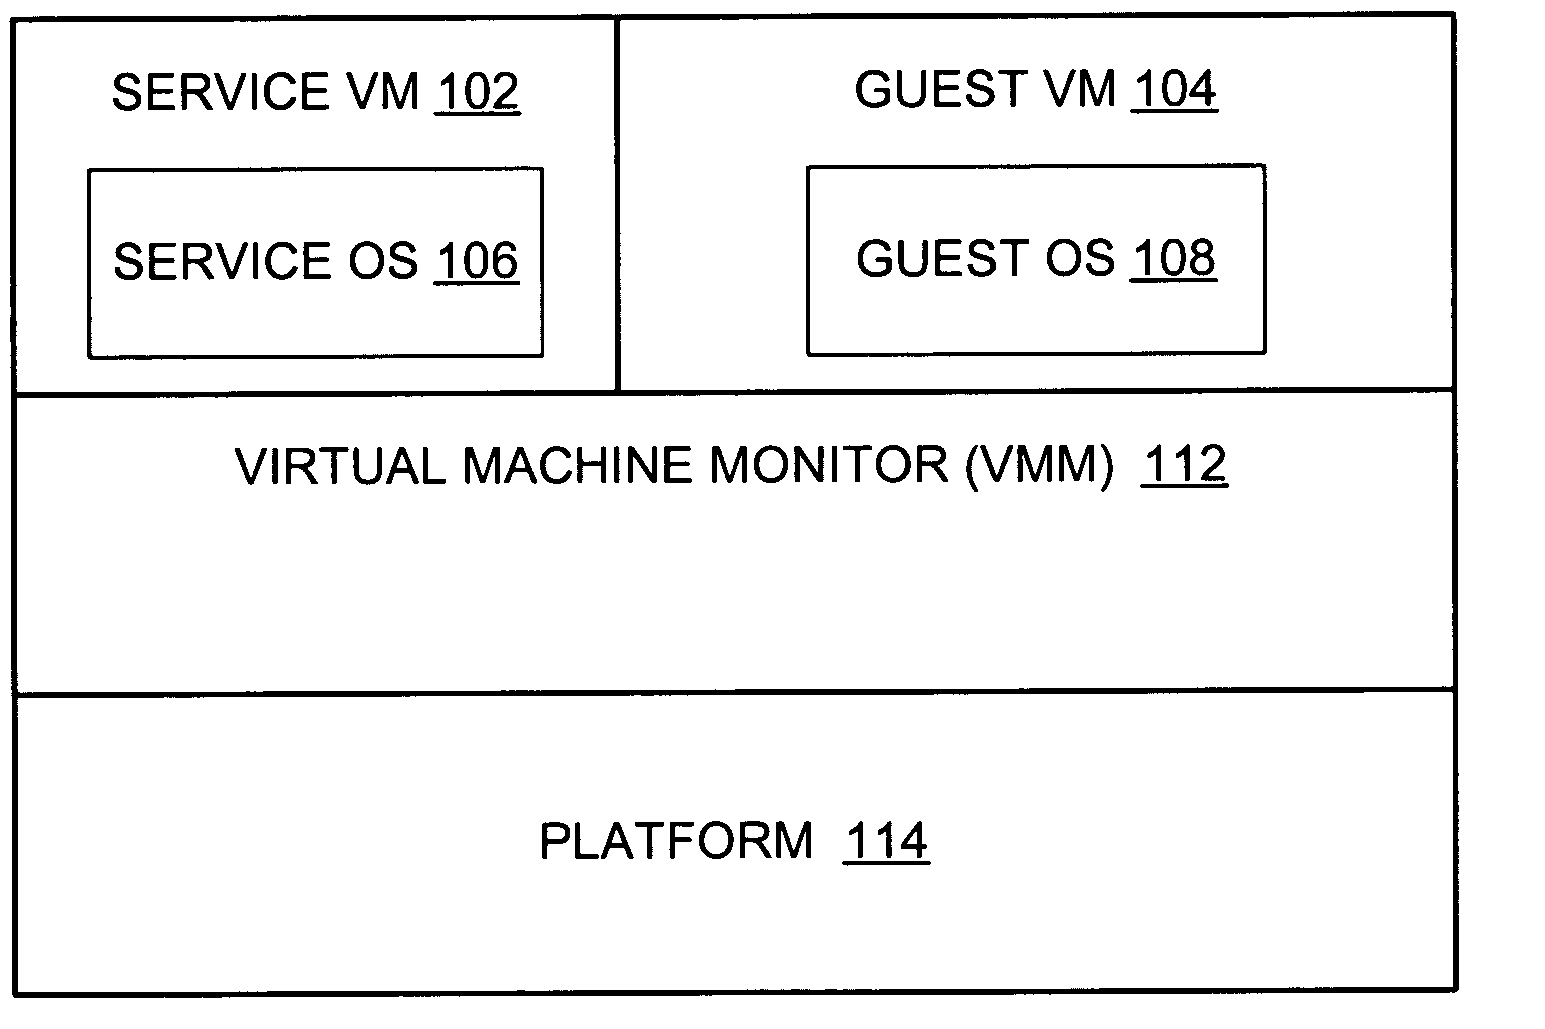 Switching between a service virtual machine and a guest virtual machine in a virtual machine monitor environment